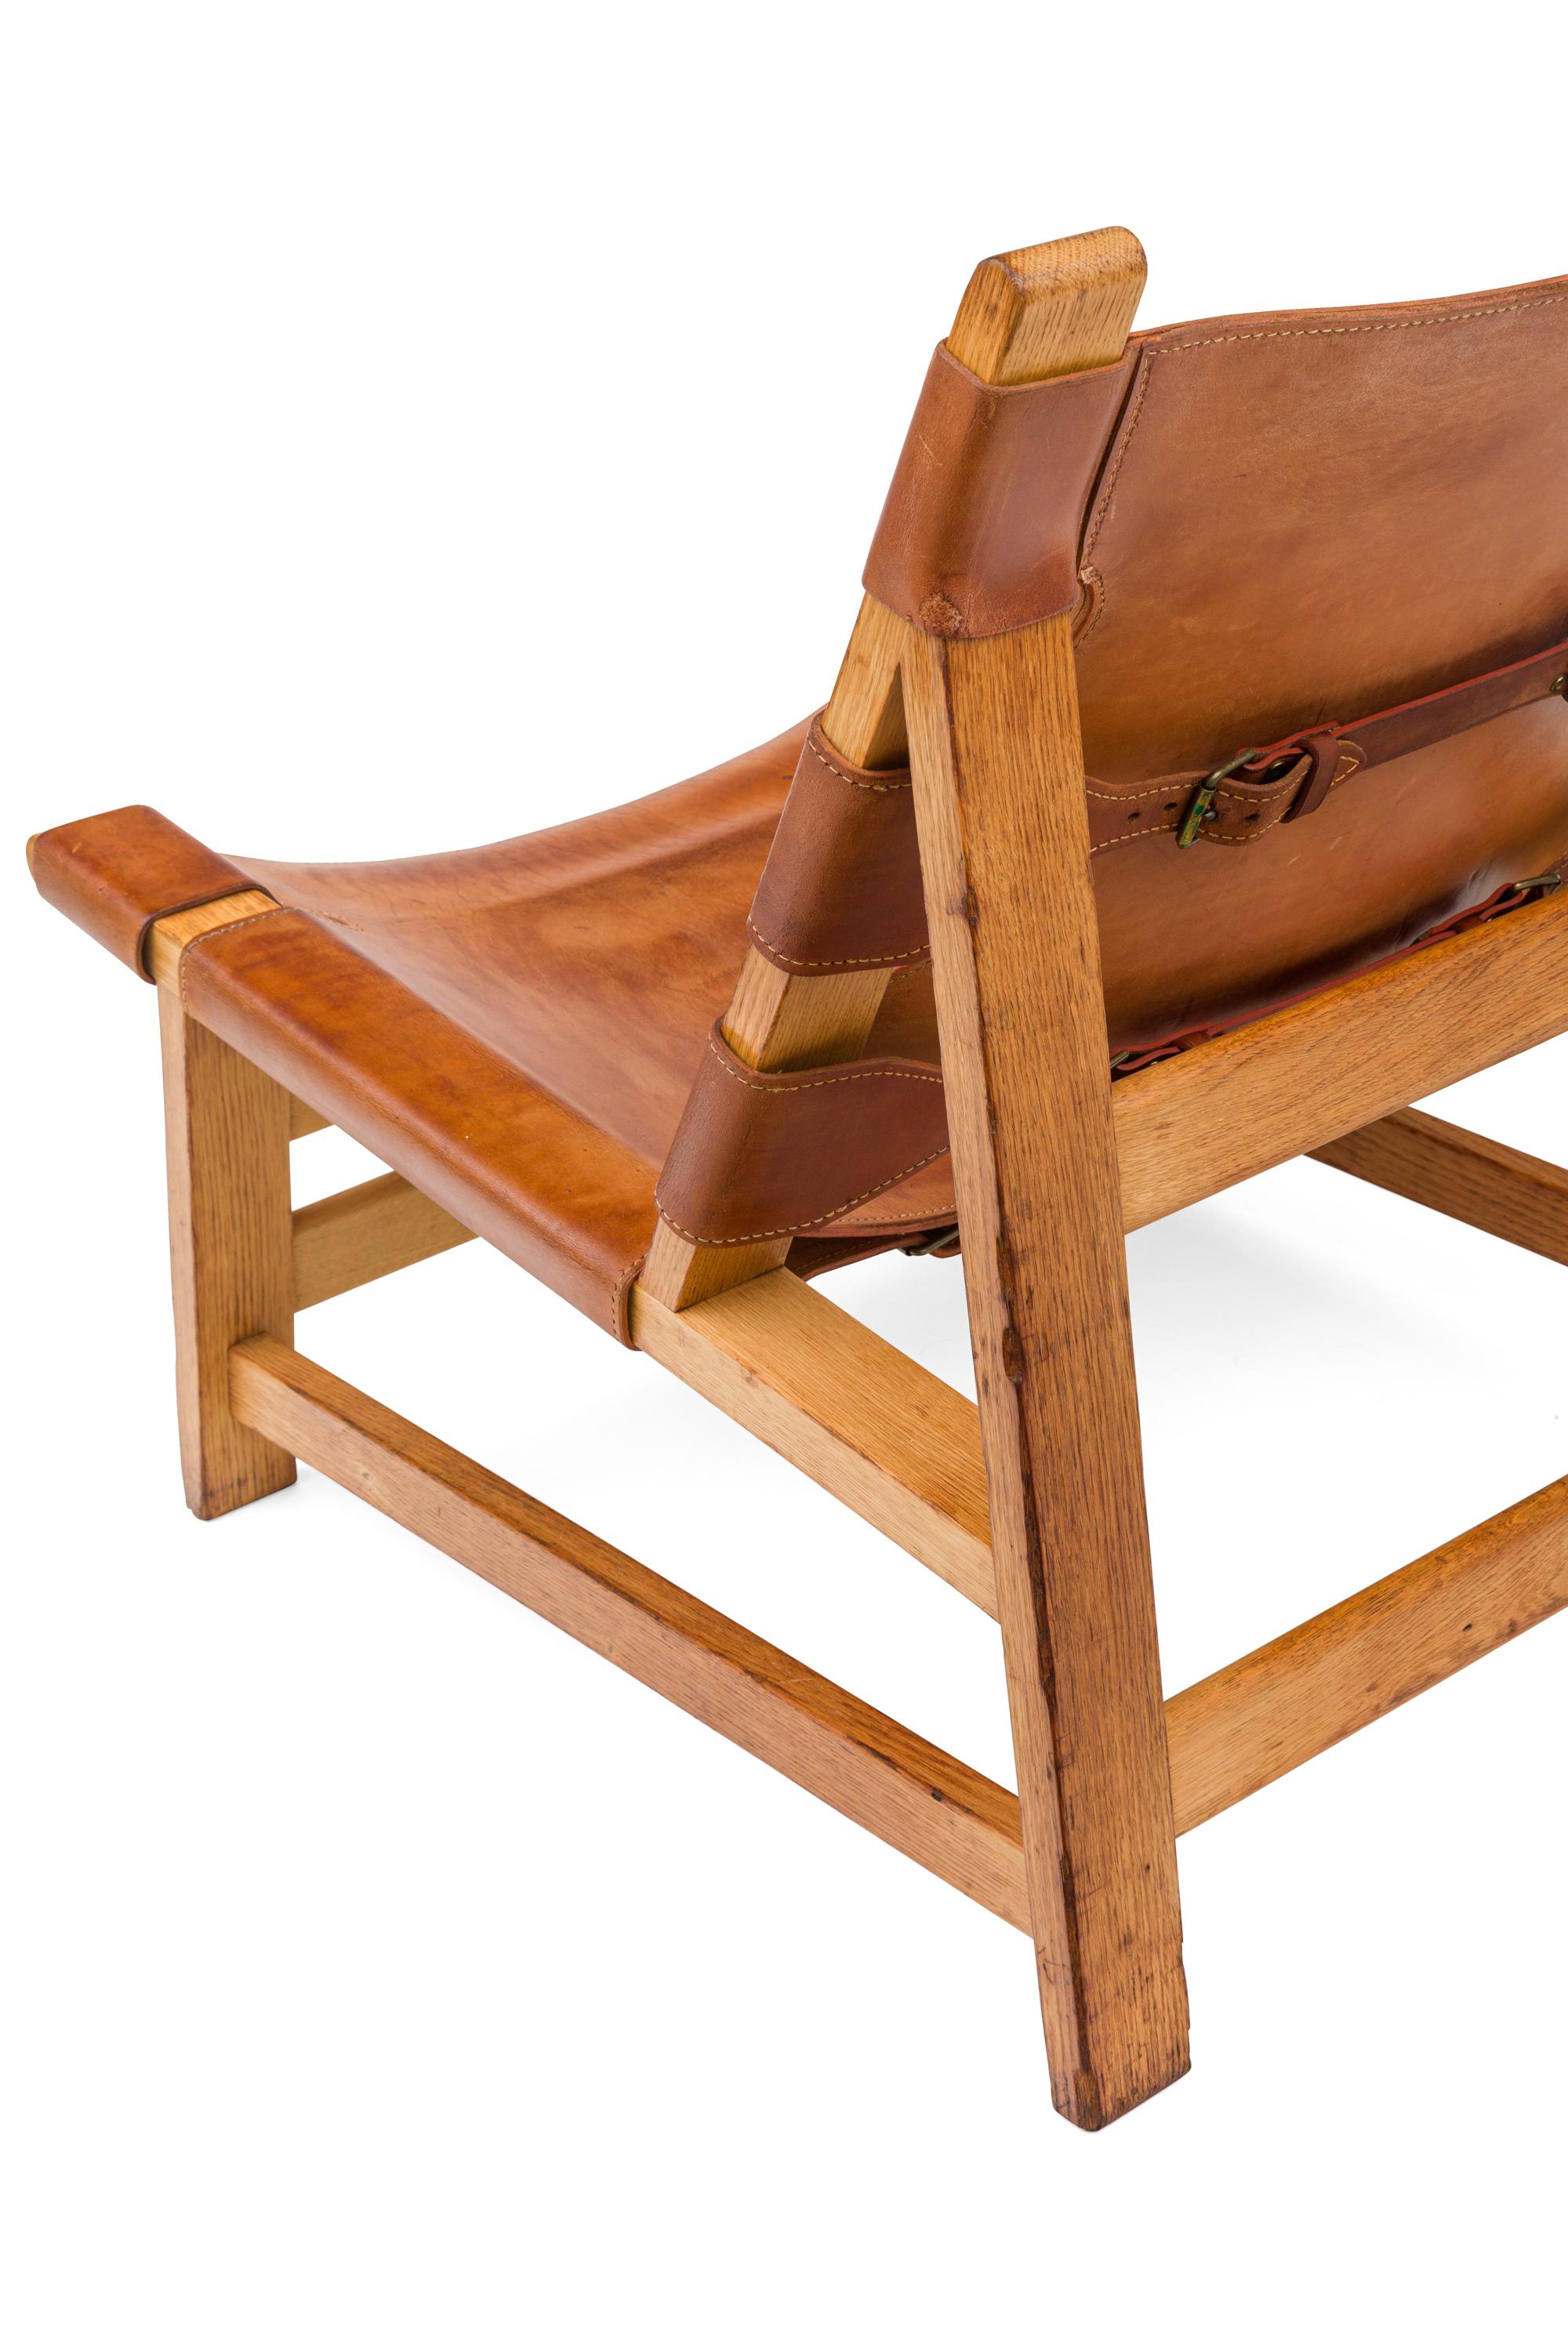 Børge Mogensen Oak and Leather Lounge Chairs, Denmark, 1960s For Sale 3